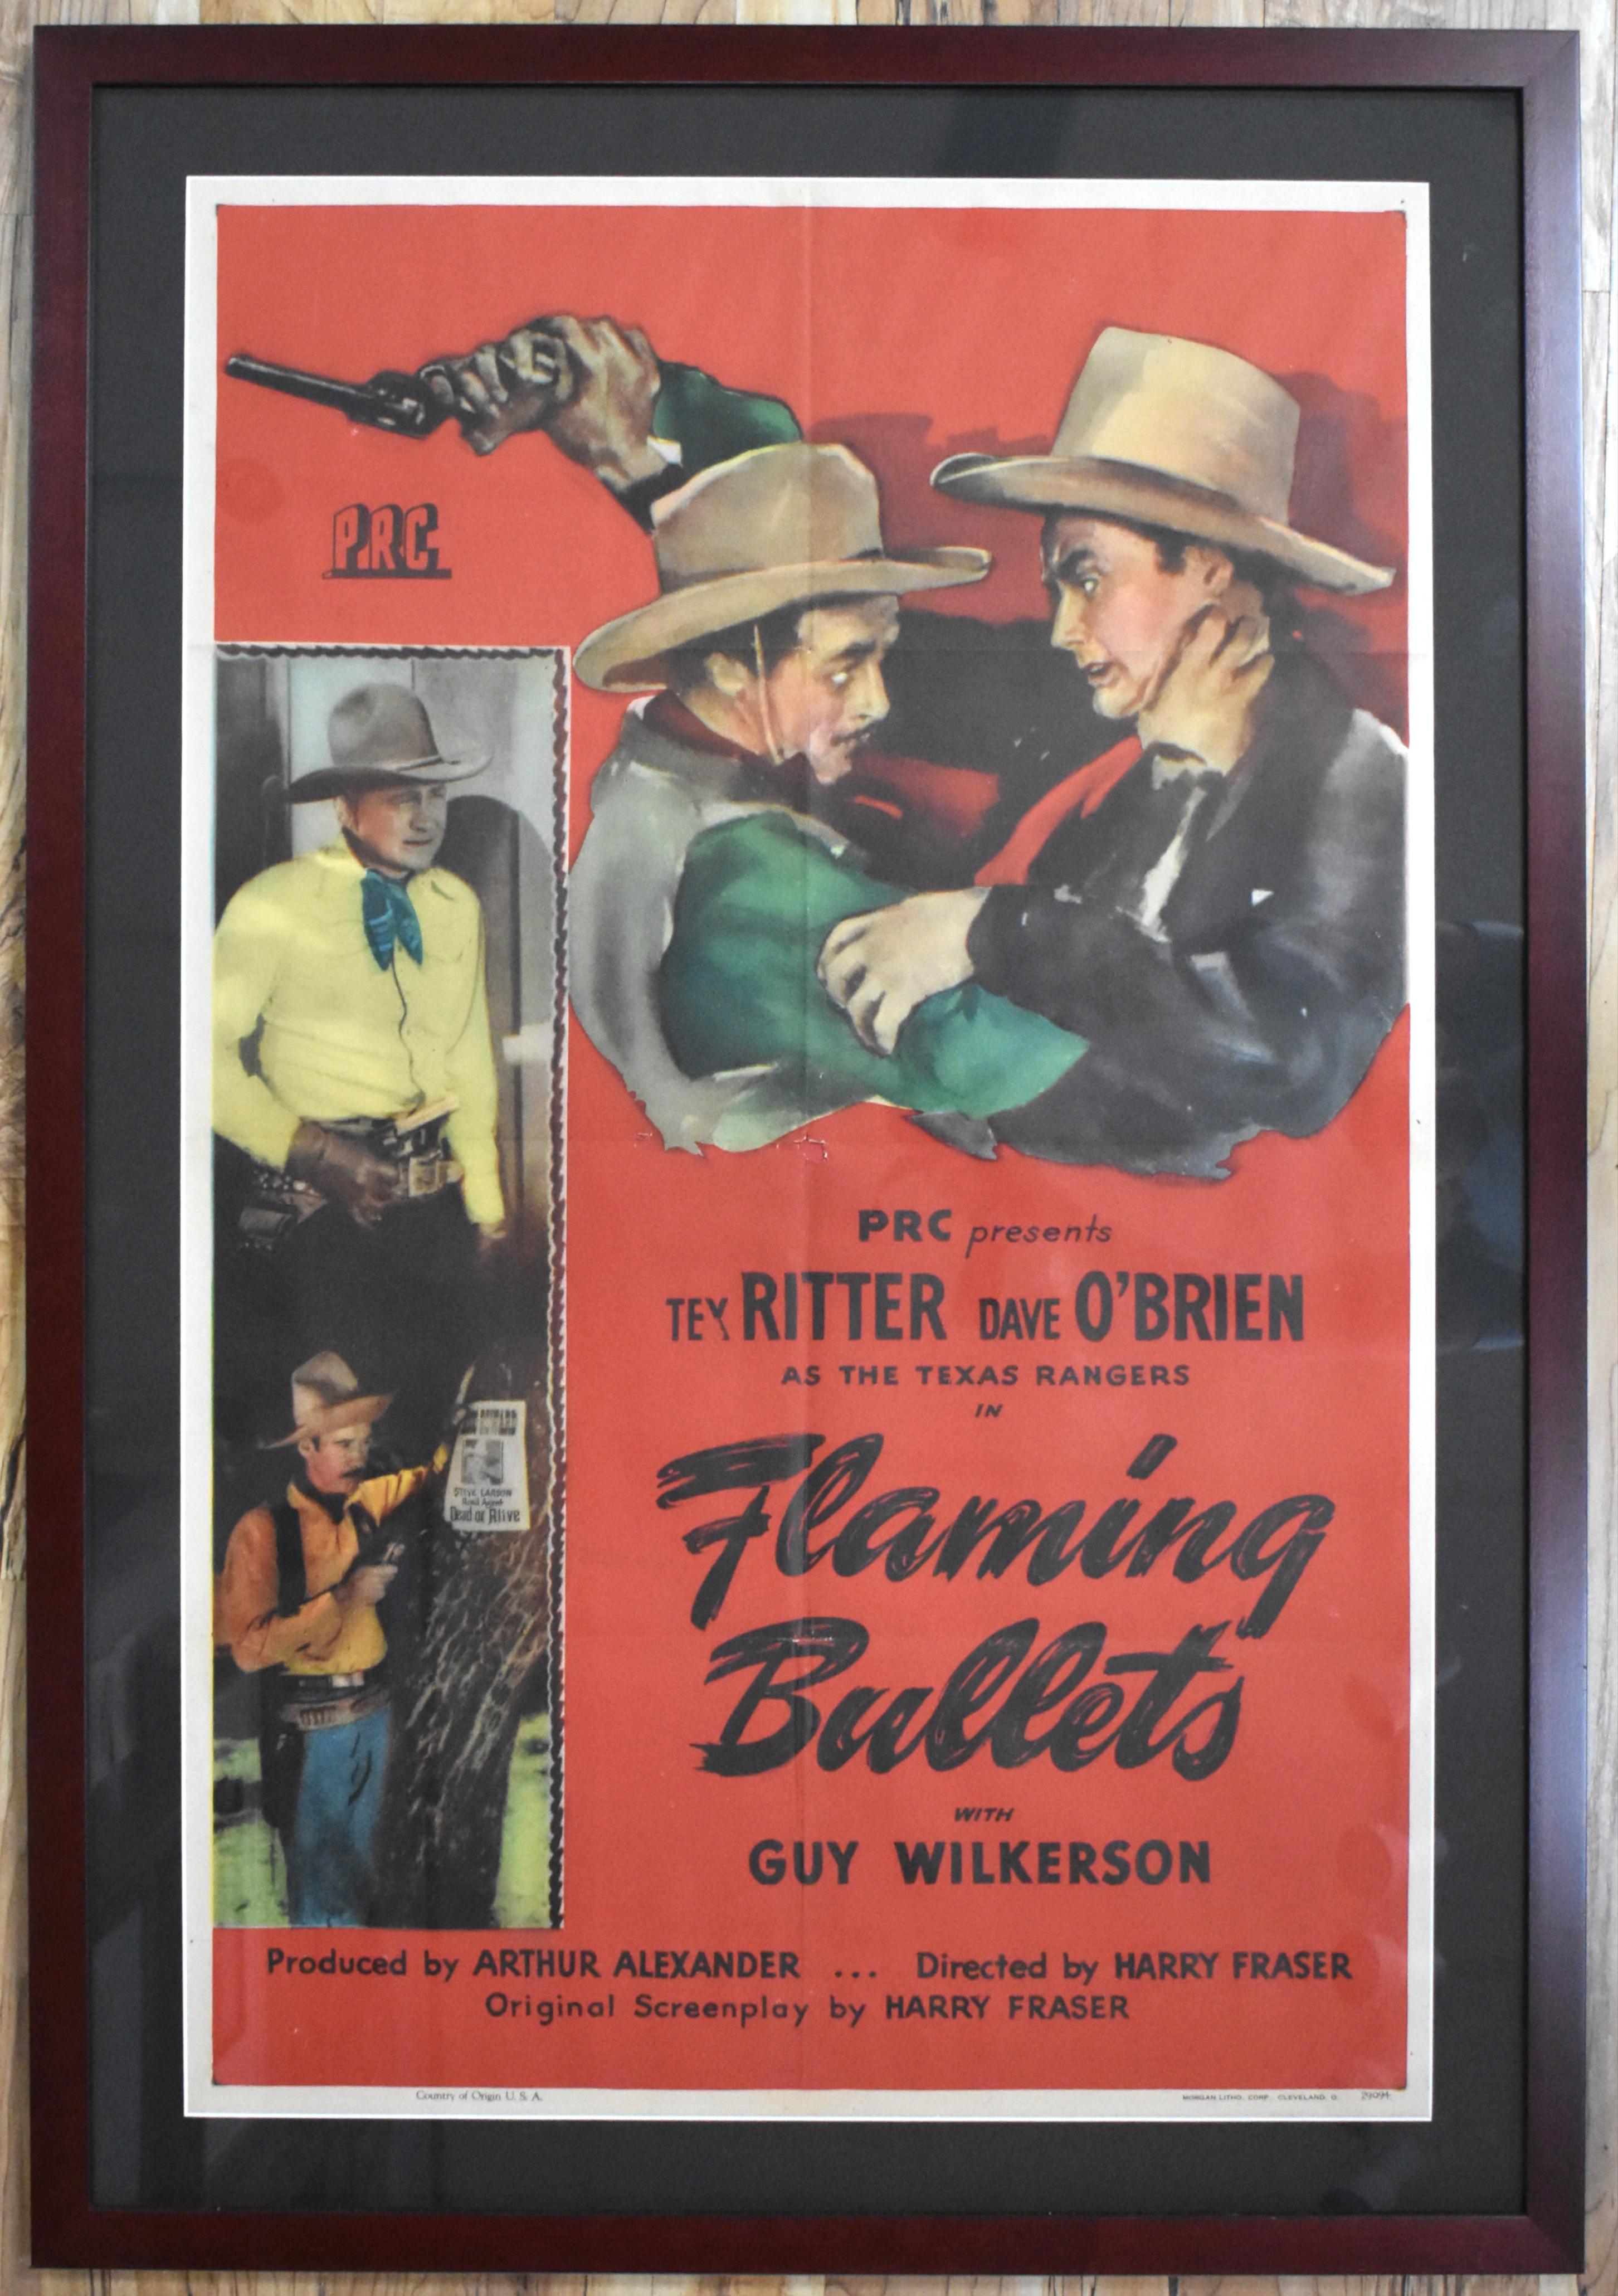 Vintage Western Movie Posters
Image Size: 41 x 27
Frame Size: 46.75 X 32.75
Medium: Print
Circa 1940s
"Flaming Bullets"